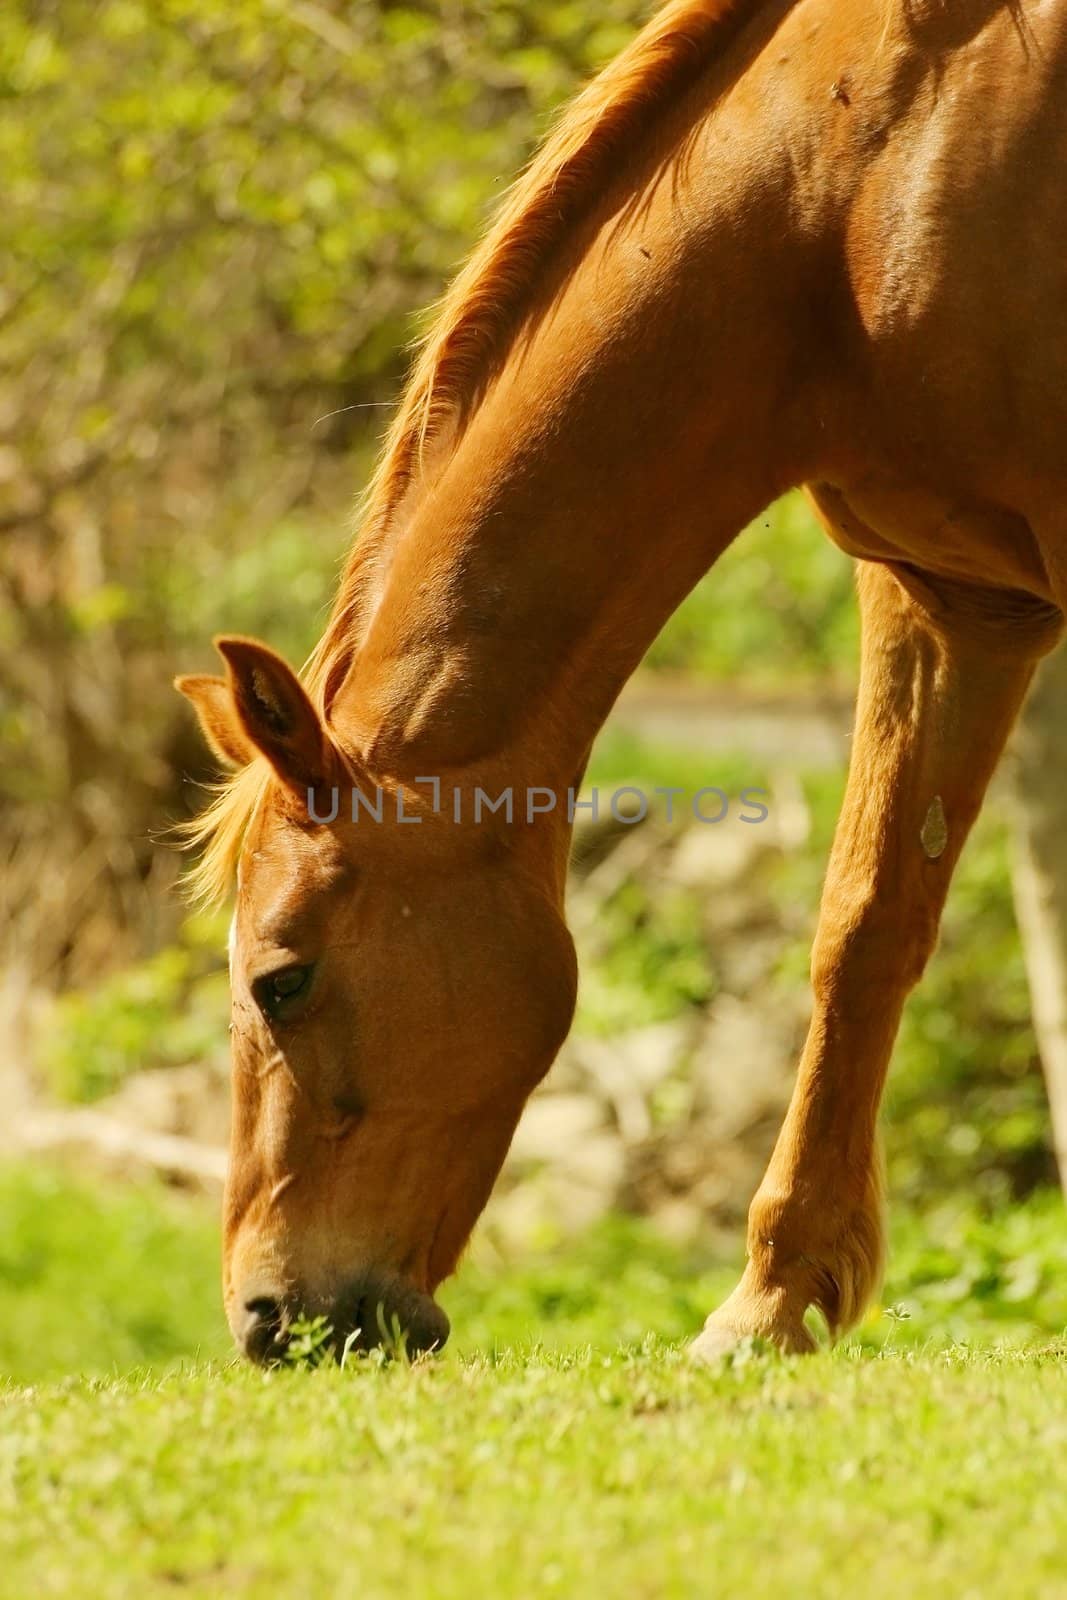 Horse peacefully eating on a sunny day